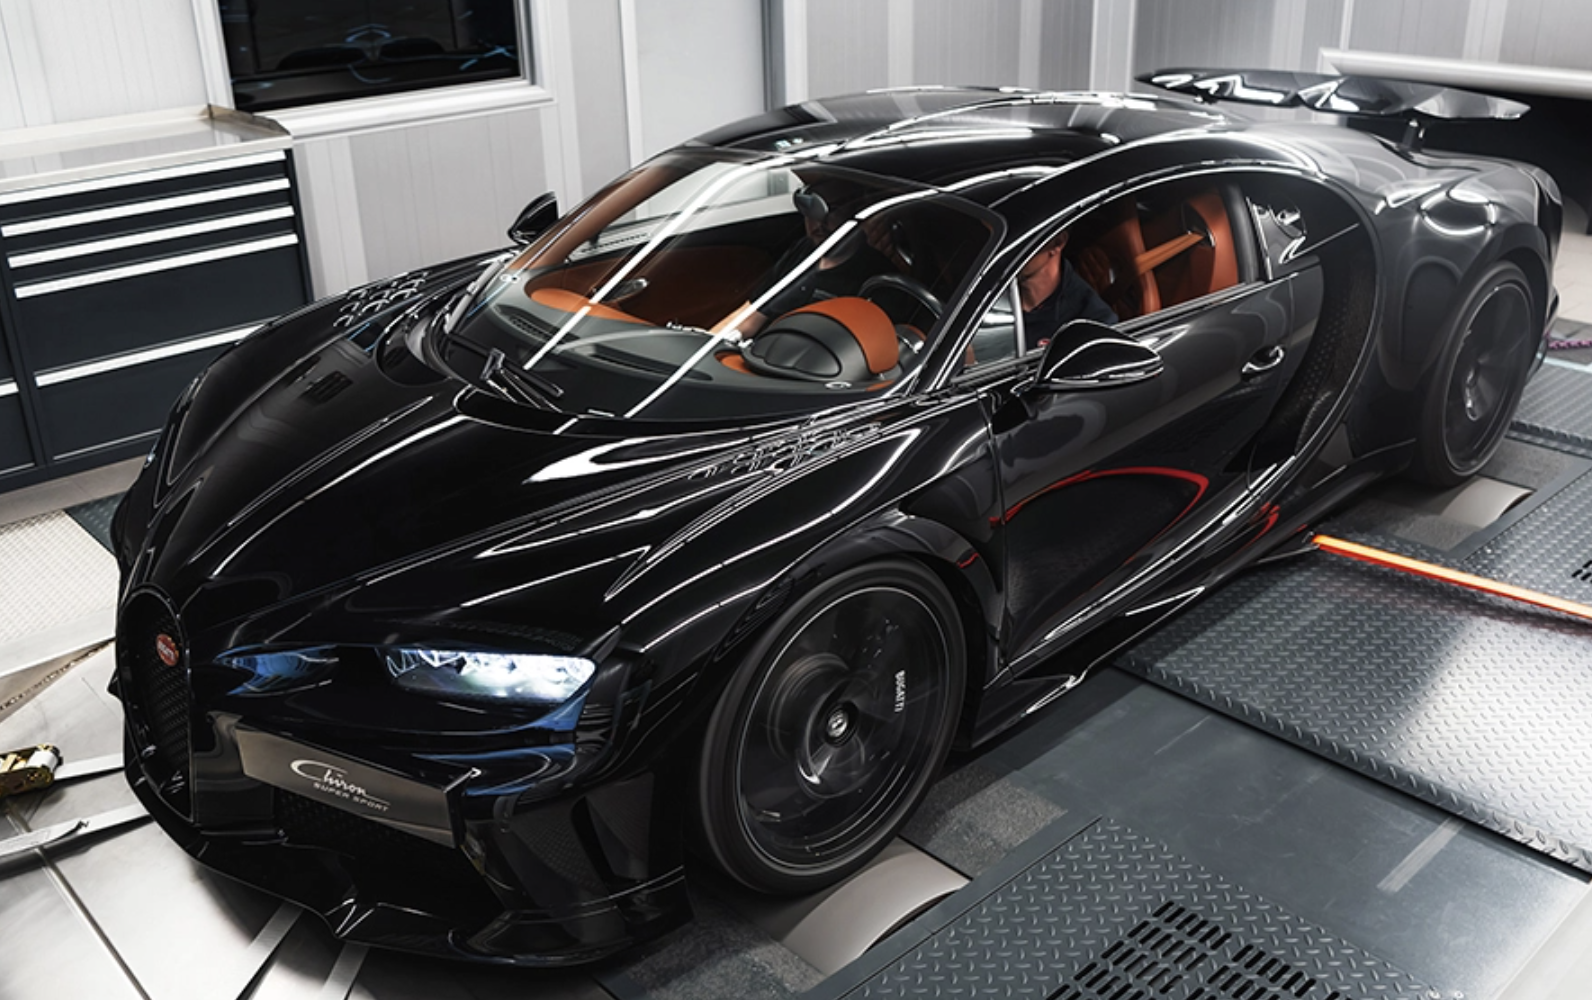 Bugatti's New Chiron Super Sport Is More Powerful Than Expected